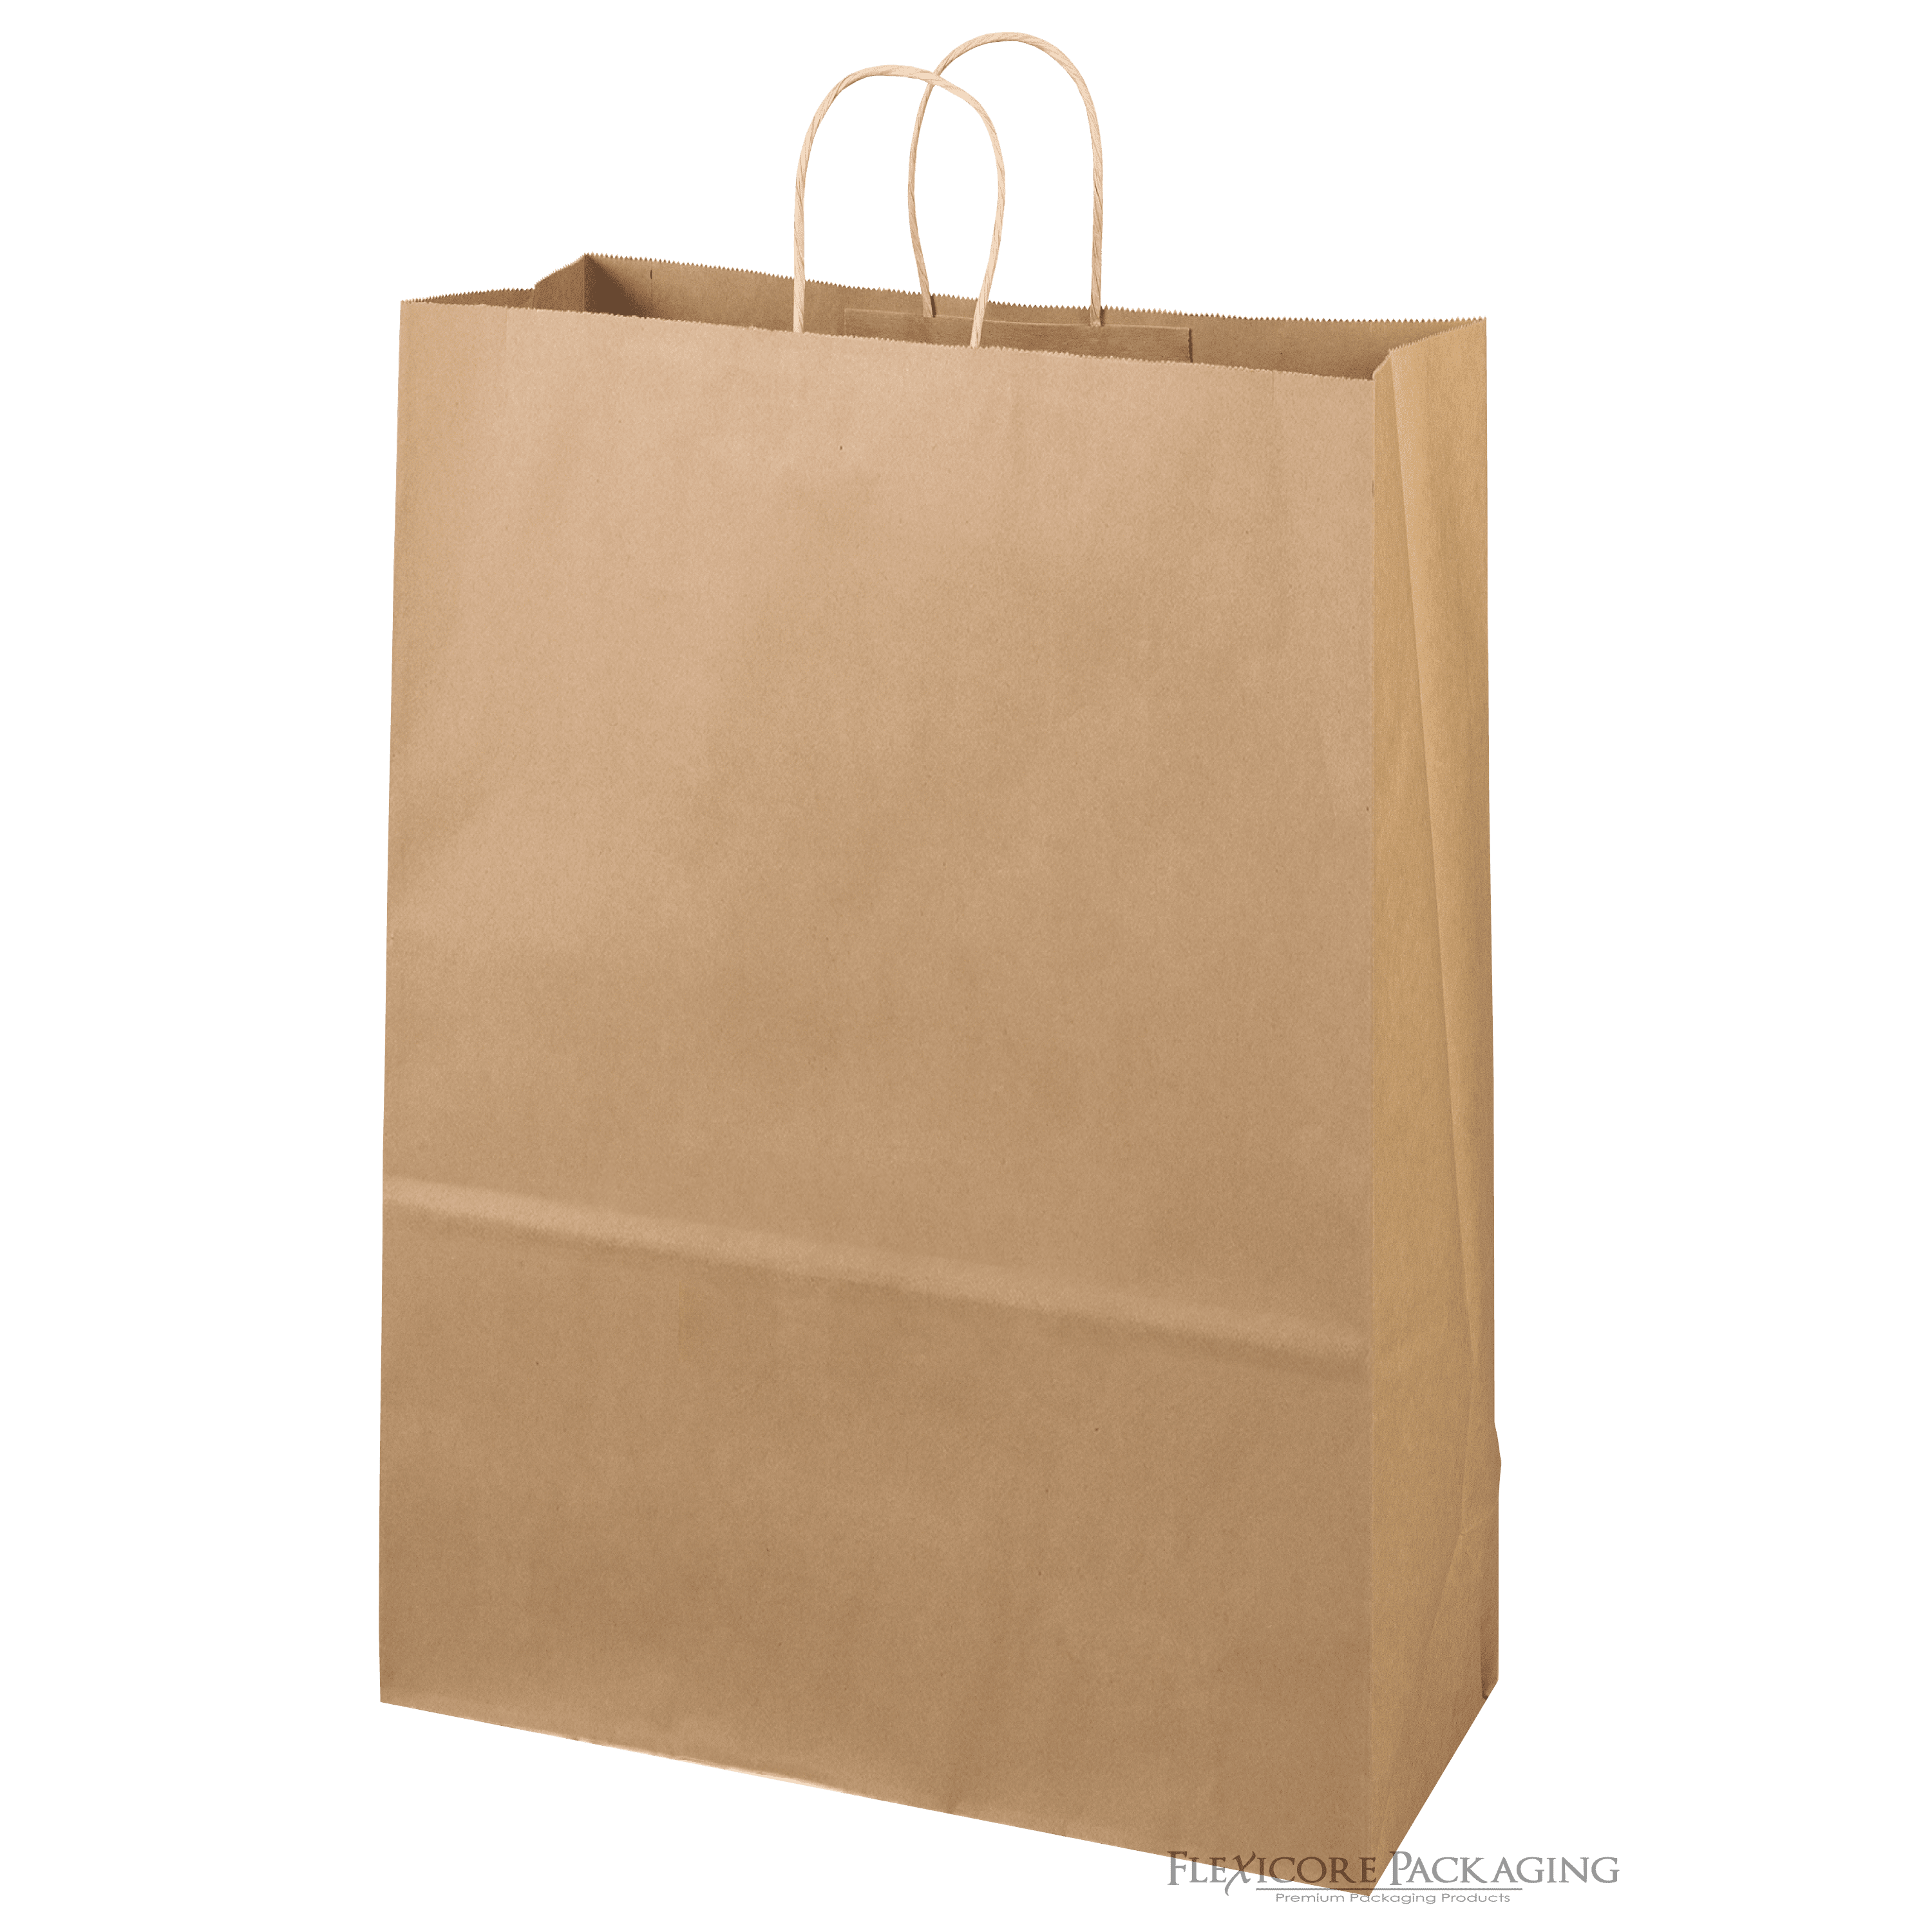 Duro SHOP13-50PK 50 Paper Retail Shopping Bags Kraft with Rope Handles